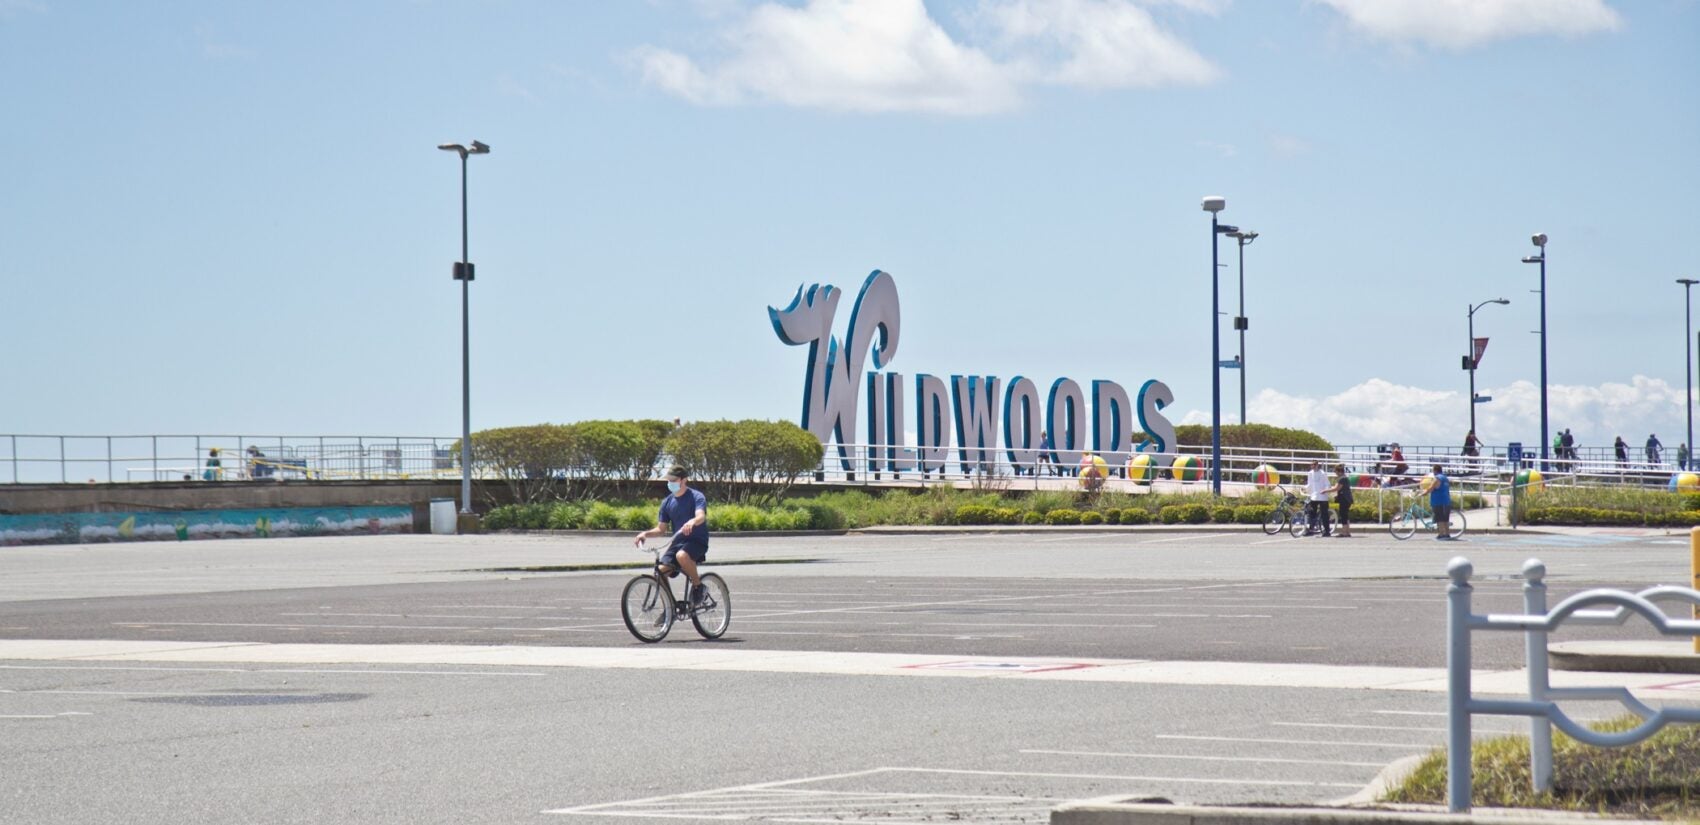 With motels closed Memorial Day weekend, Wildwood was tame compared to most years past. (Kimberly Paynter/WHYY)